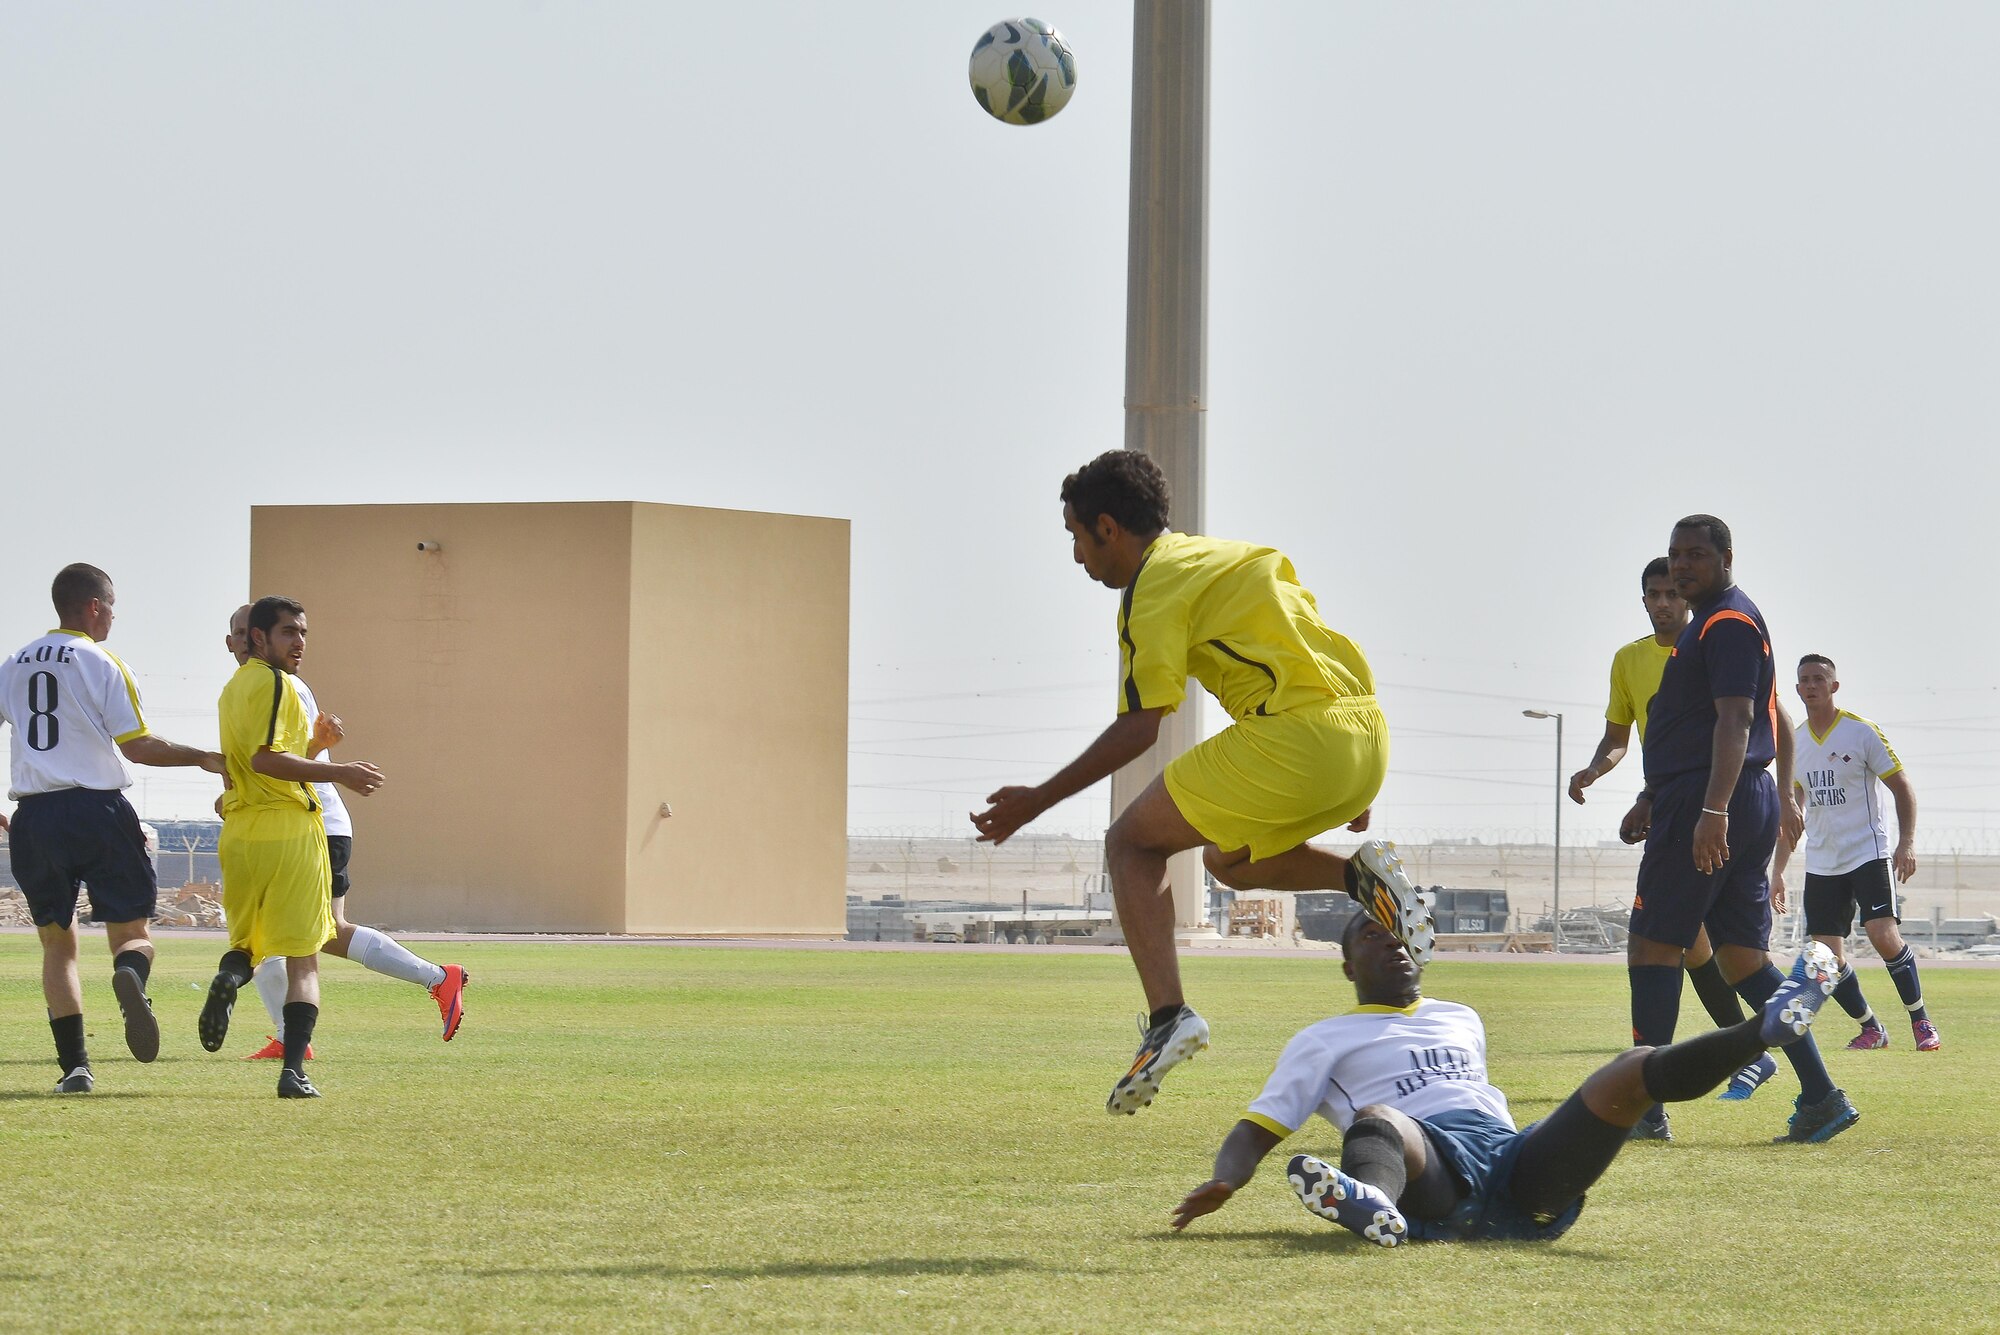 A member of the Qatari Air Base soccer team heads the ball towards a teammate in a match against the Al Udeid All-Stars in celebration of the 240th U.S.  Army birthday June 14, 2015 at Al Udeid Air Base, Qatar. AUAB All-Stars planned a soccer match to help strengthen the partnership between the U.S. and Qatari military and build friendships between service members. (U.S. Air Force photo/Staff Sgt. Alexandre Montes)